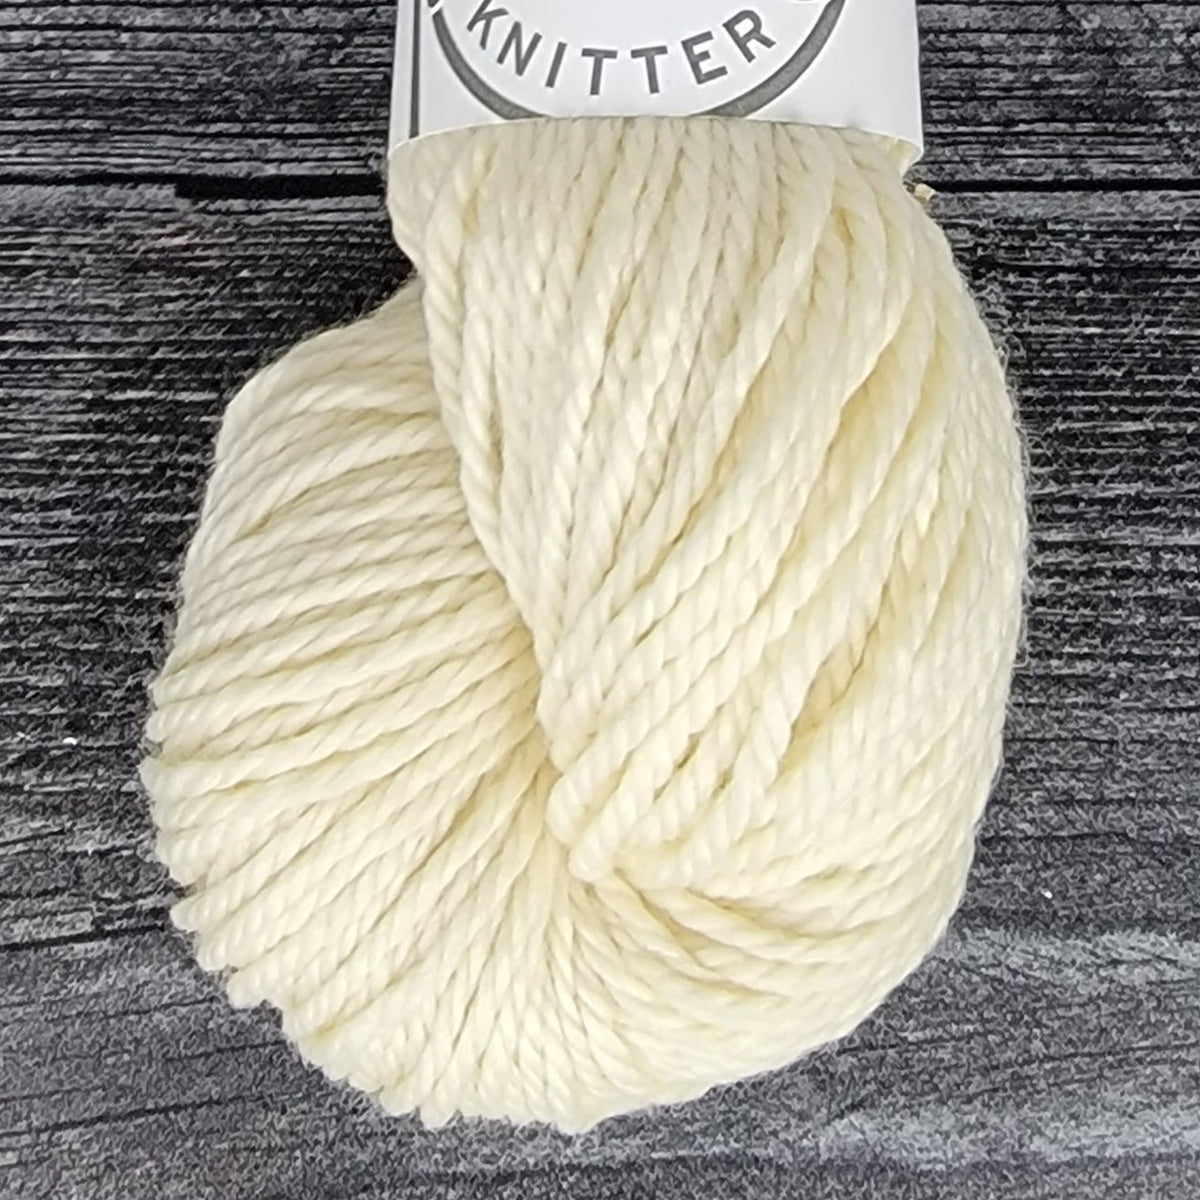 Super Bulky Weight Yarn – Wooden SpoolsQuilting, Knitting and More!